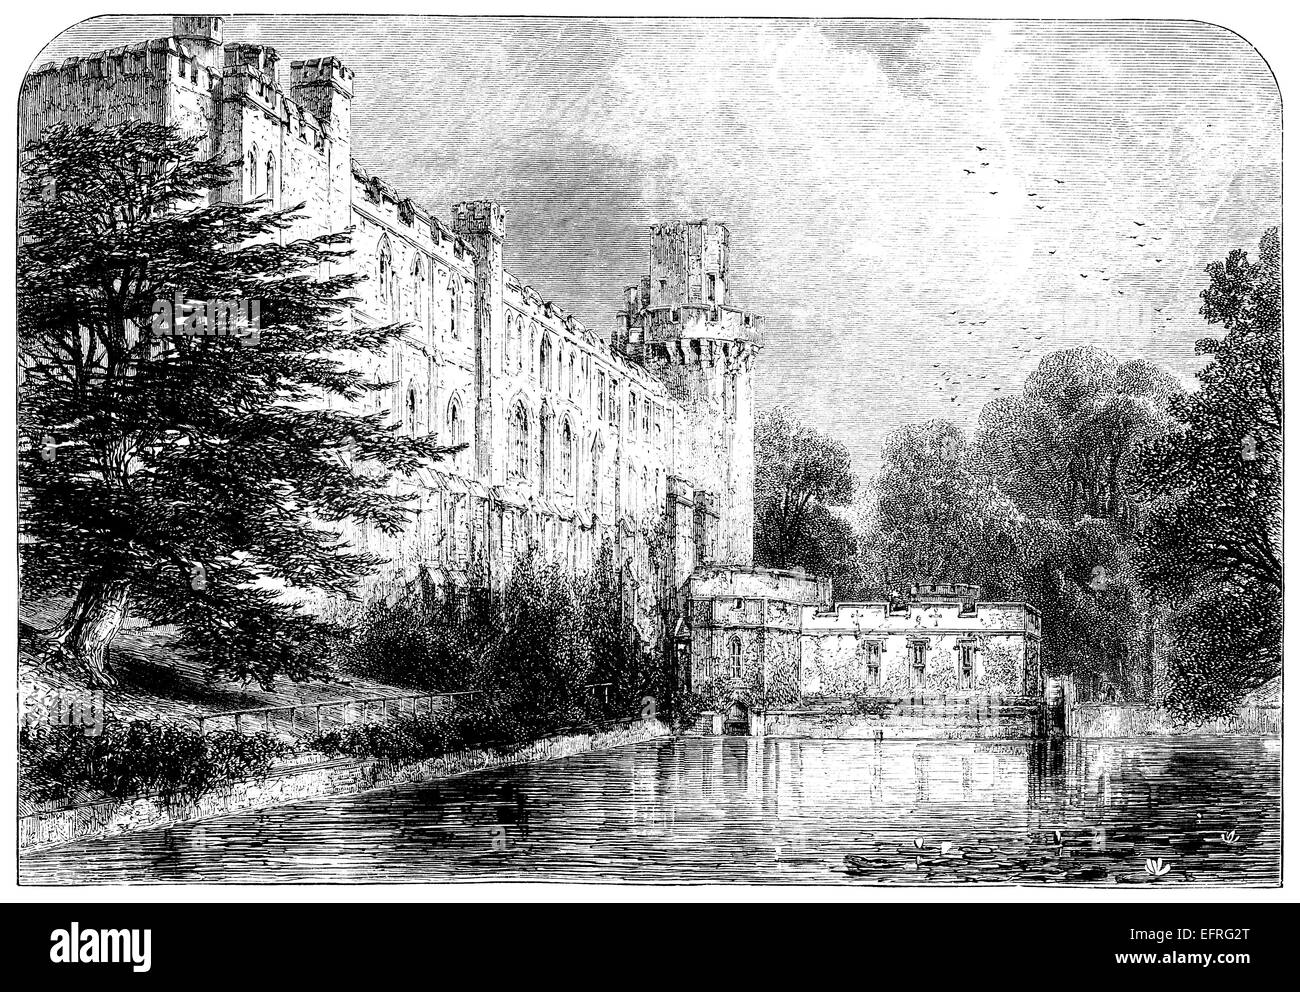 Warwick Castle, photographed from a book 'English Pictures Drawn with Pen and Pencil' published in London ca. 1870. Stock Photo